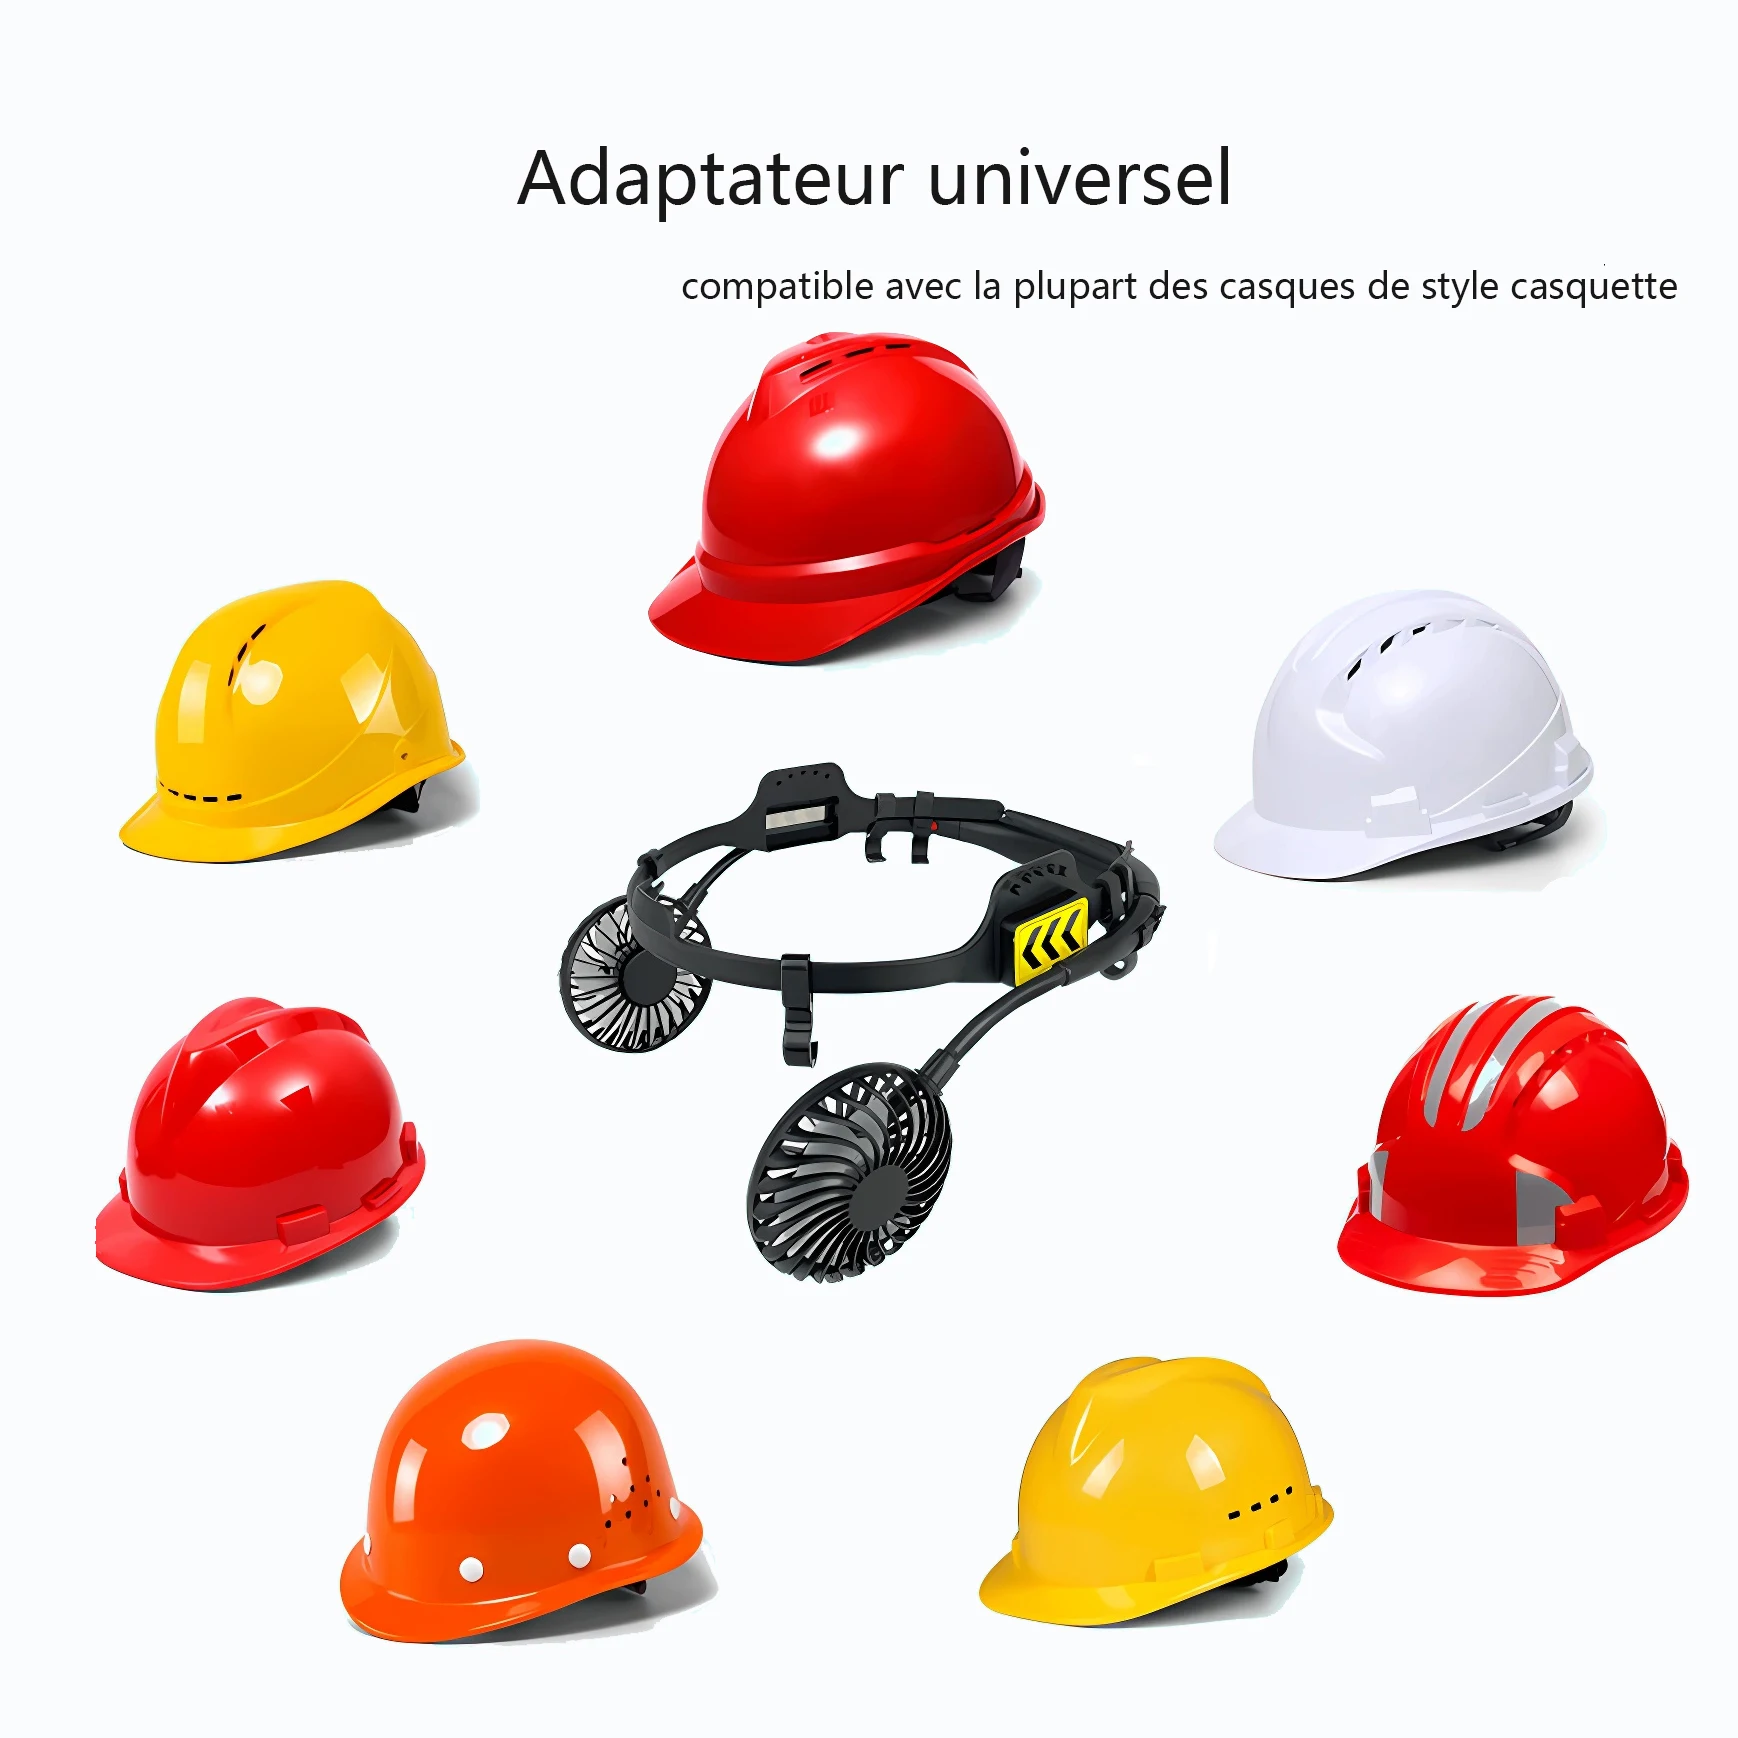 2023 New Hard Hat Fan 3 Gear Speed with Night Light Cooling Summer Universal Adapter for Most Cap Style Safety Helmet